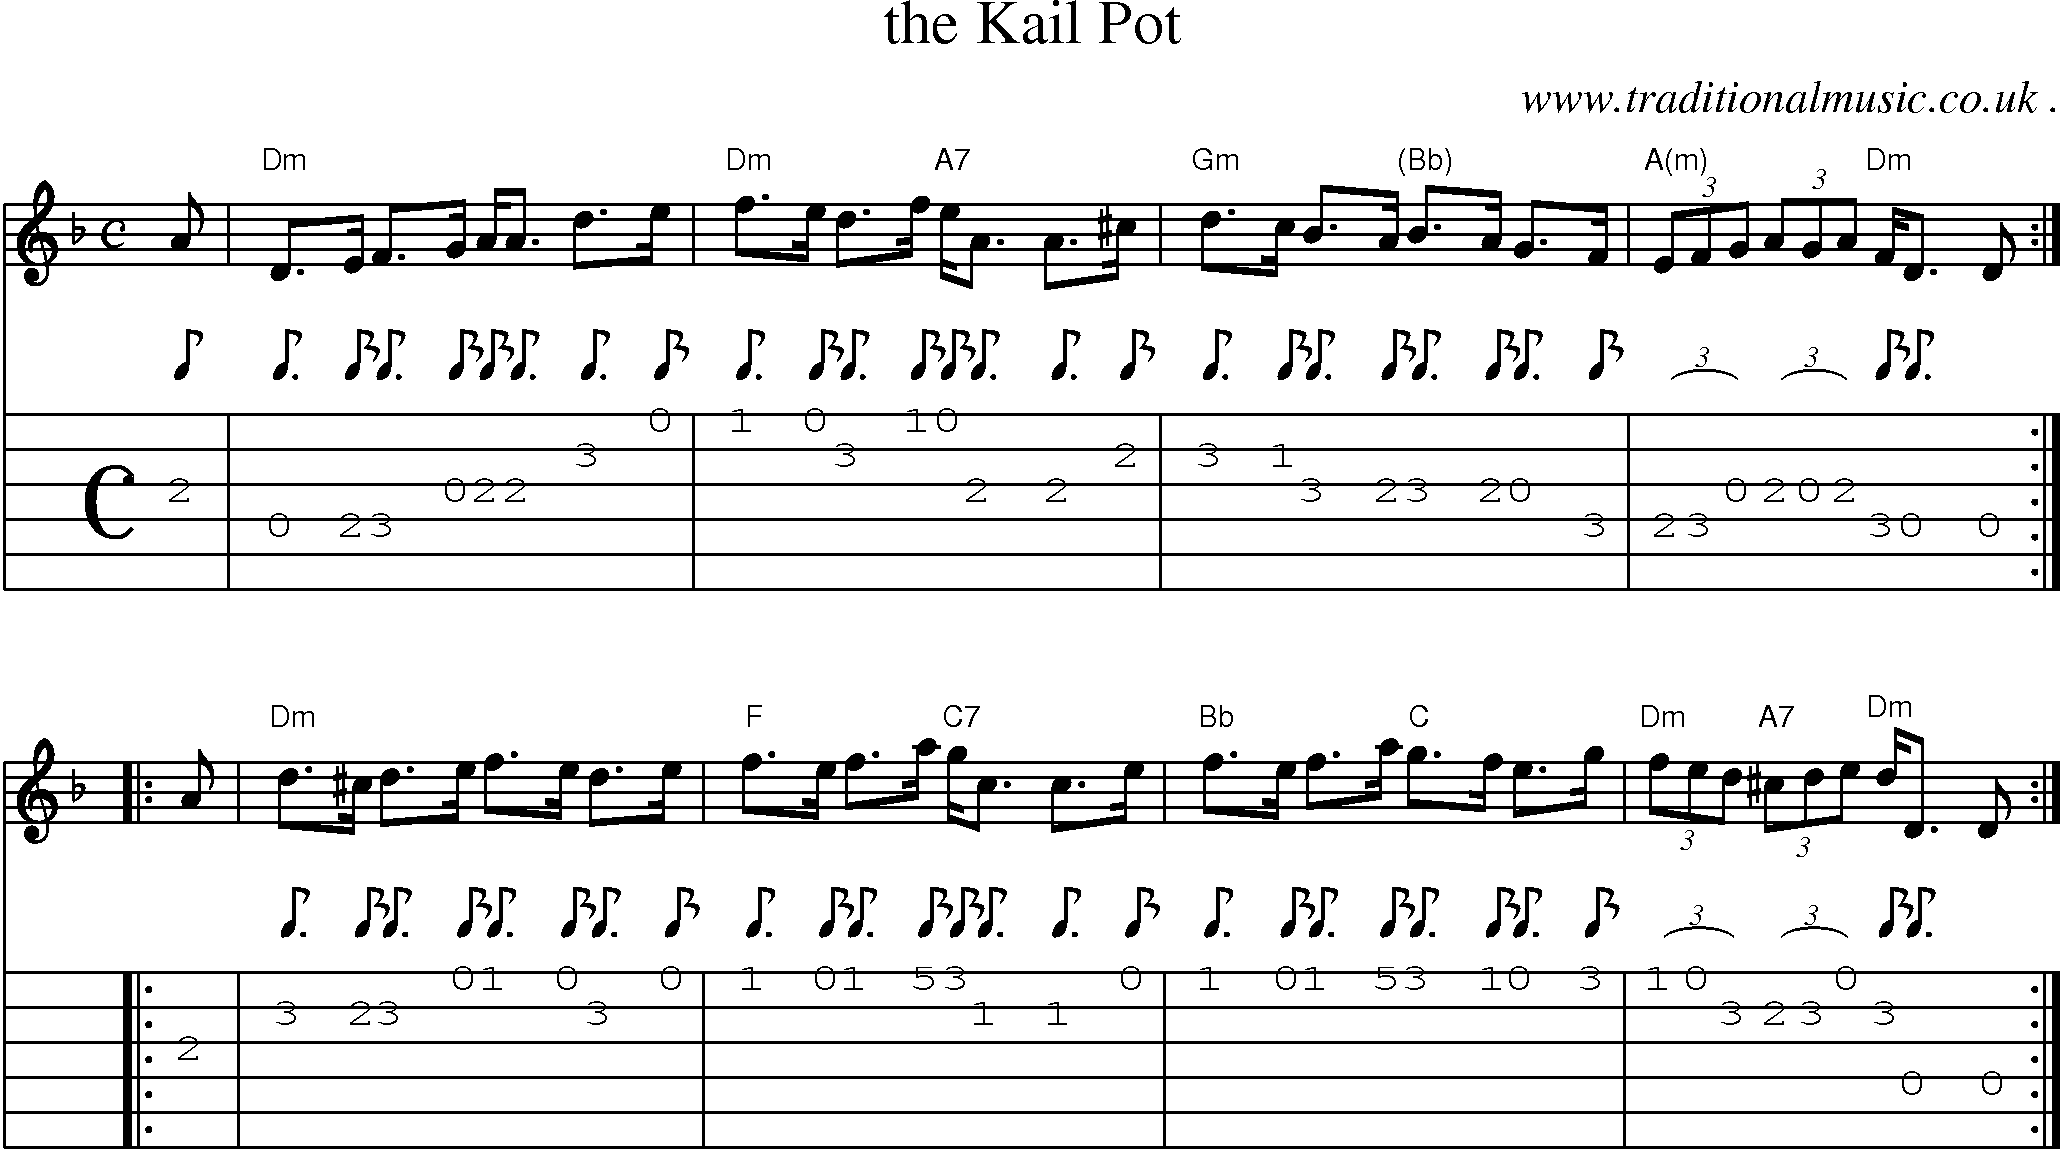 Sheet-music  score, Chords and Guitar Tabs for The Kail Pot